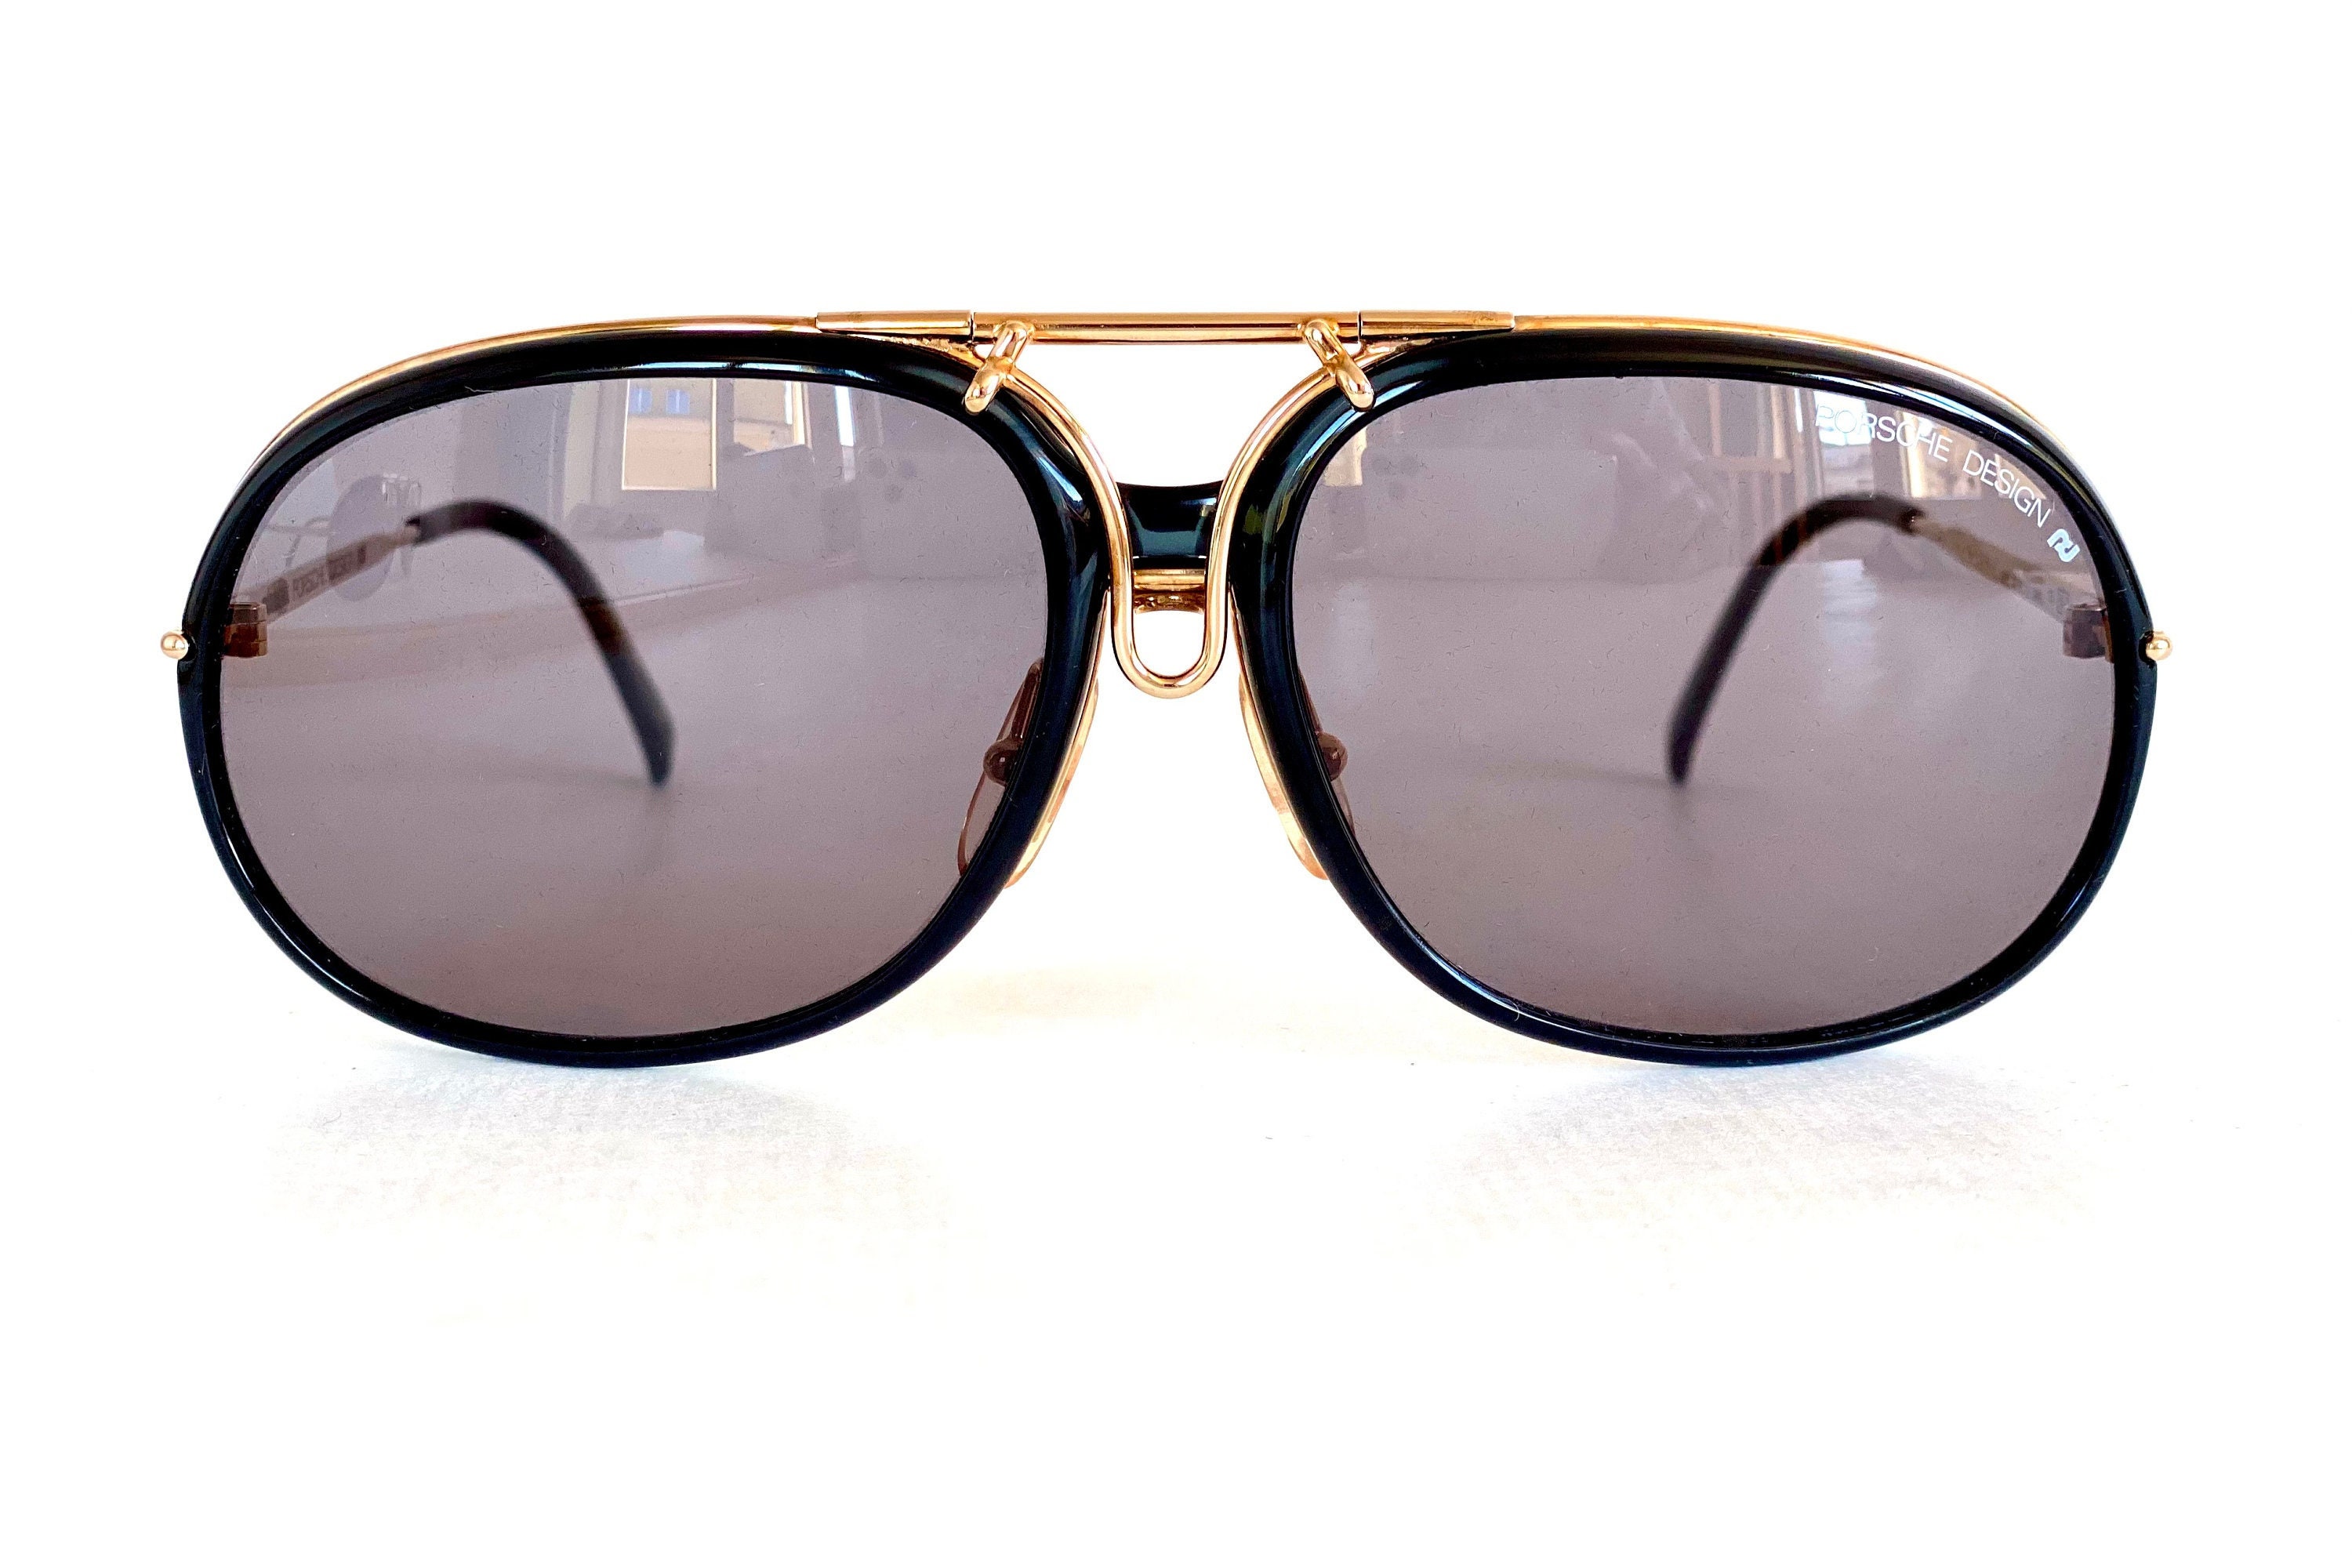 Vintage Porsche Design by Carrera 5631 Sunglasses Full Set with Sets of ...